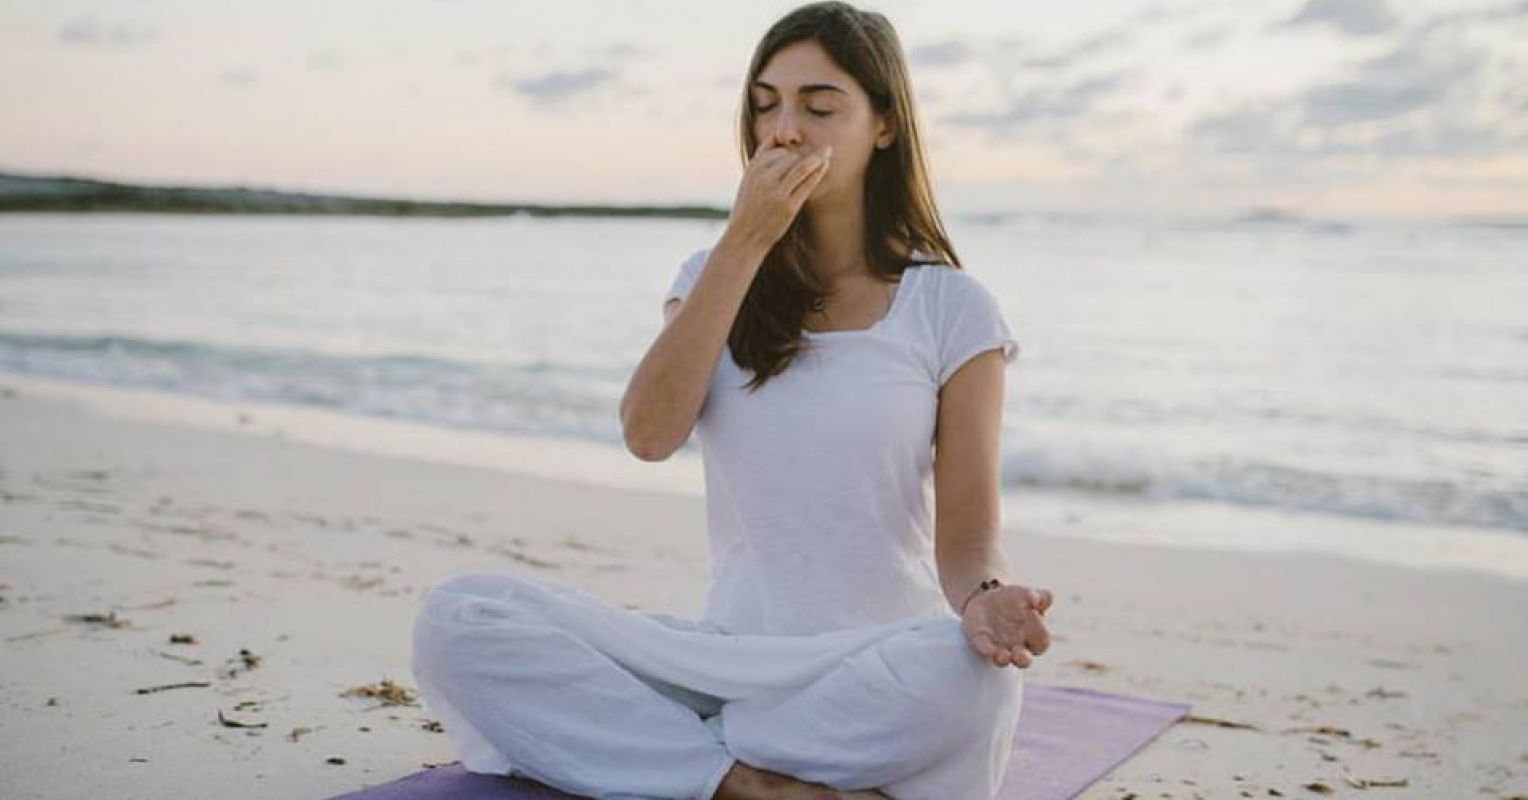 The secrets of breath  you refuse to see